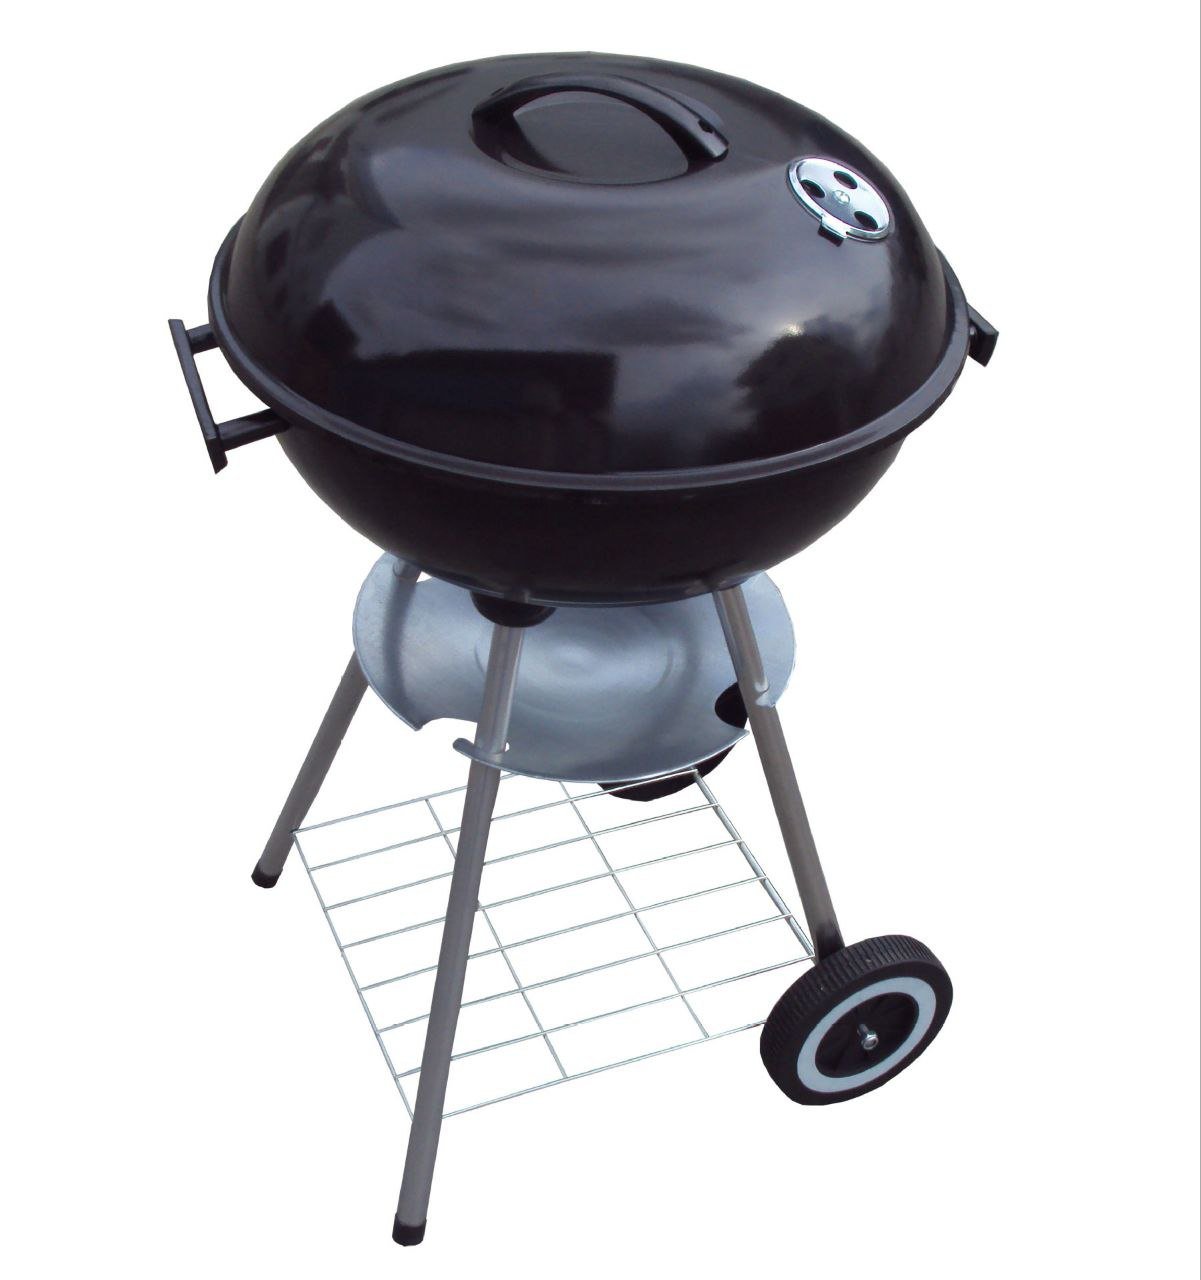 Apple Stove Kettle Charcoal Barbecue bbq Grills